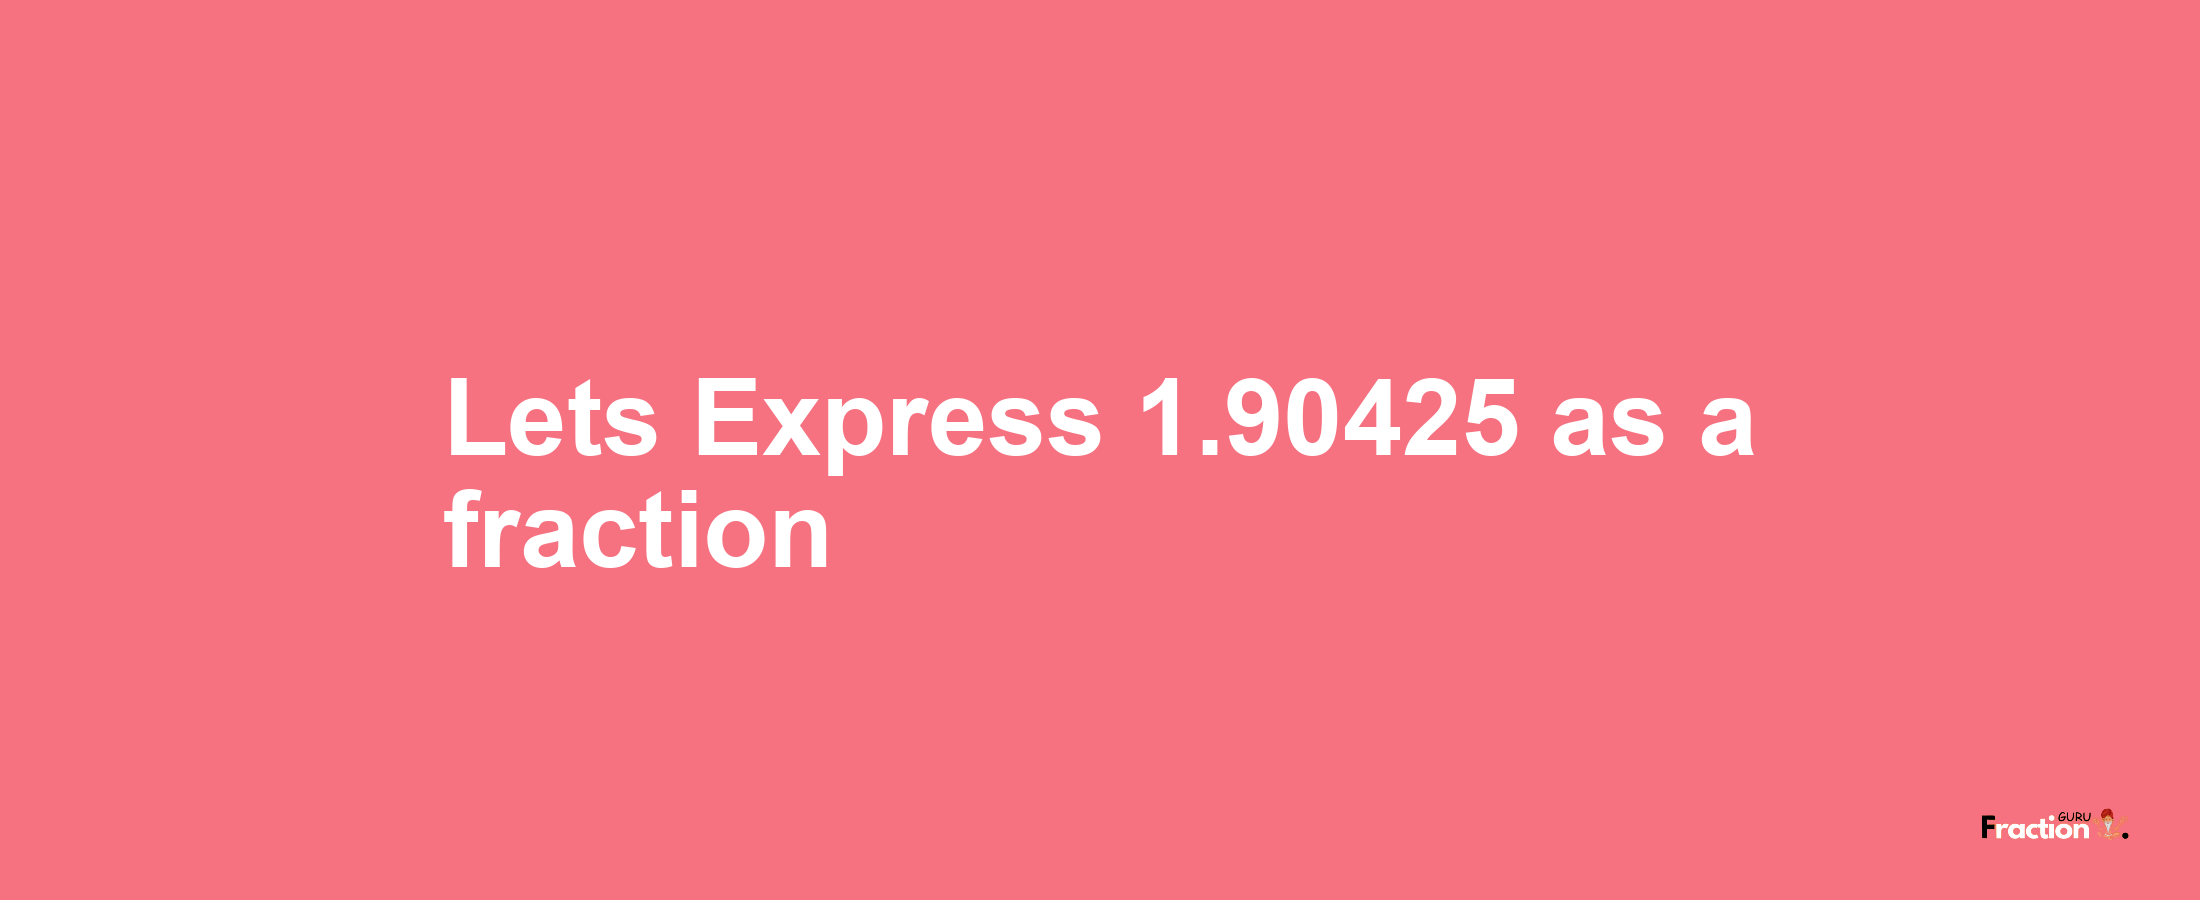 Lets Express 1.90425 as afraction